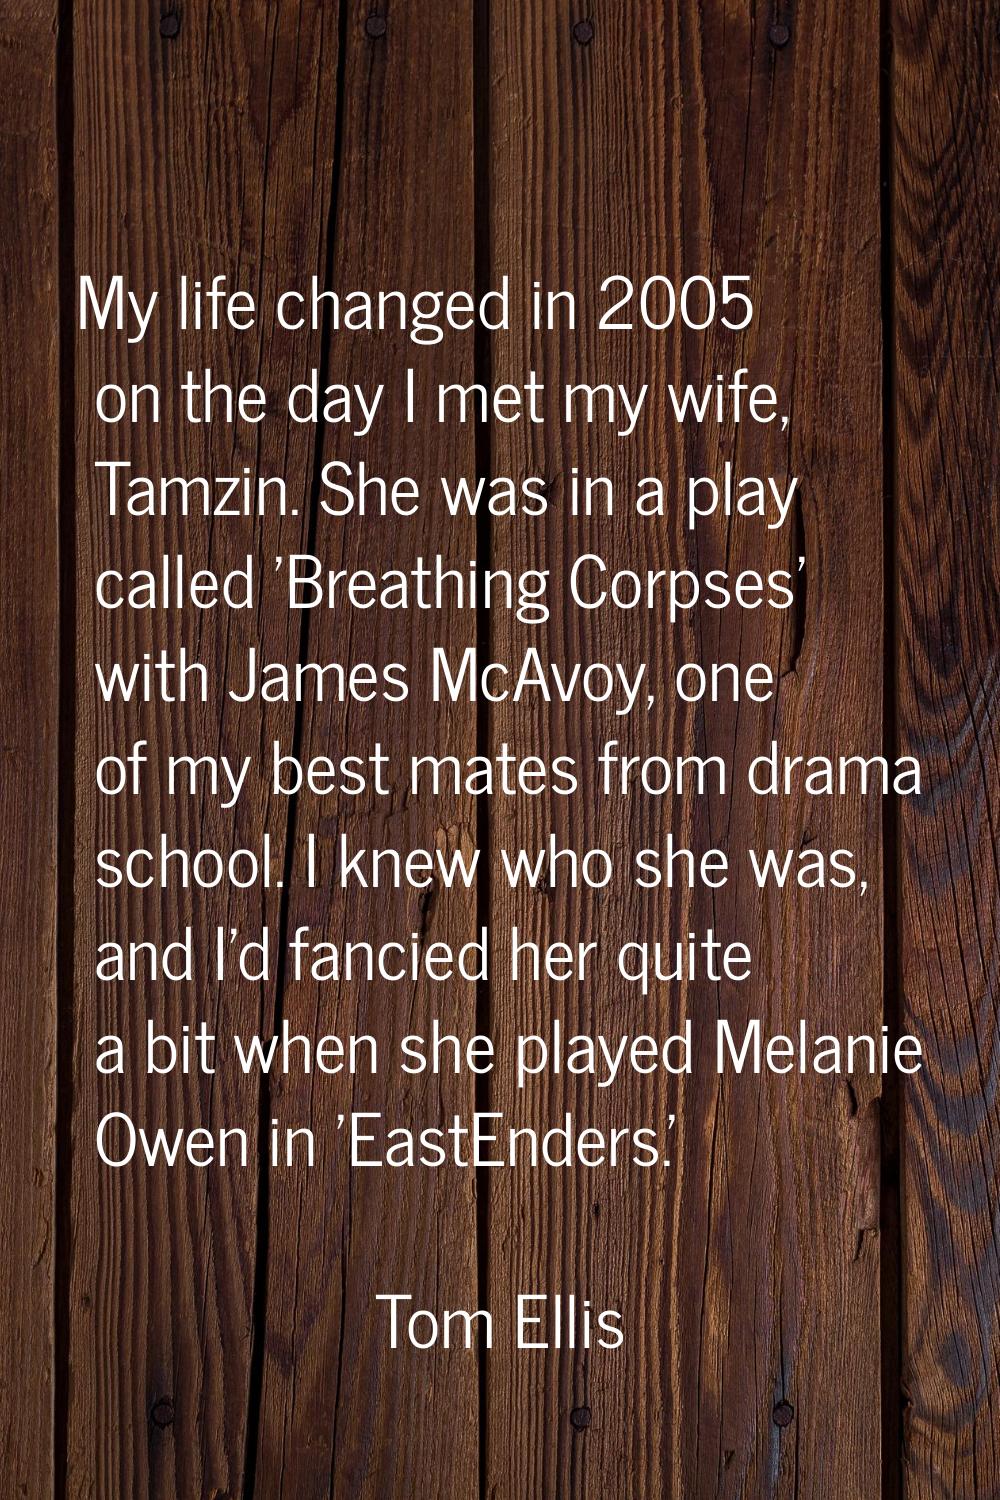 My life changed in 2005 on the day I met my wife, Tamzin. She was in a play called 'Breathing Corps